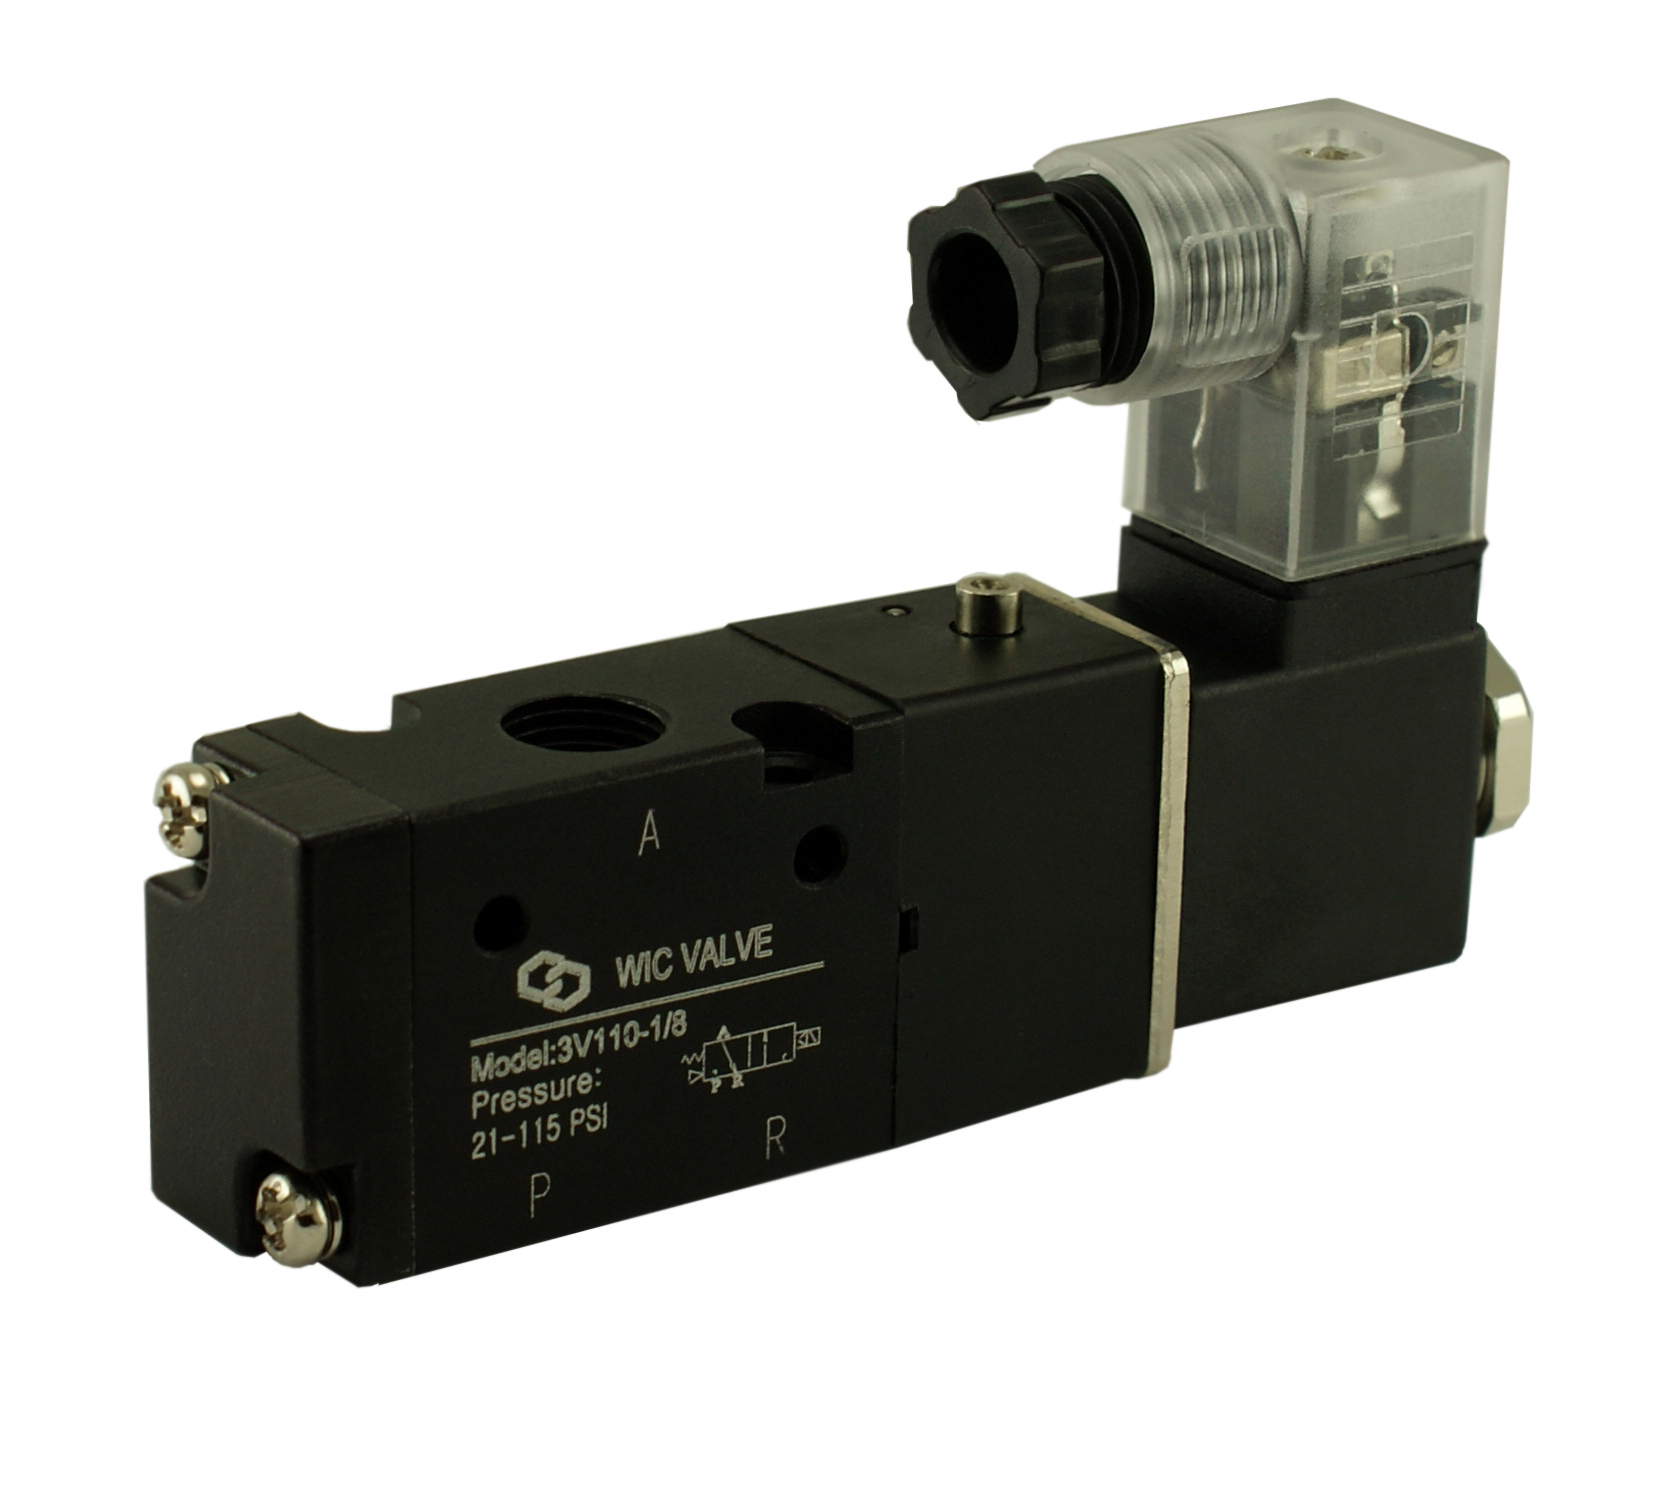 Solenoid Valves - Solenoids in non xp and xp with Manifold or inline